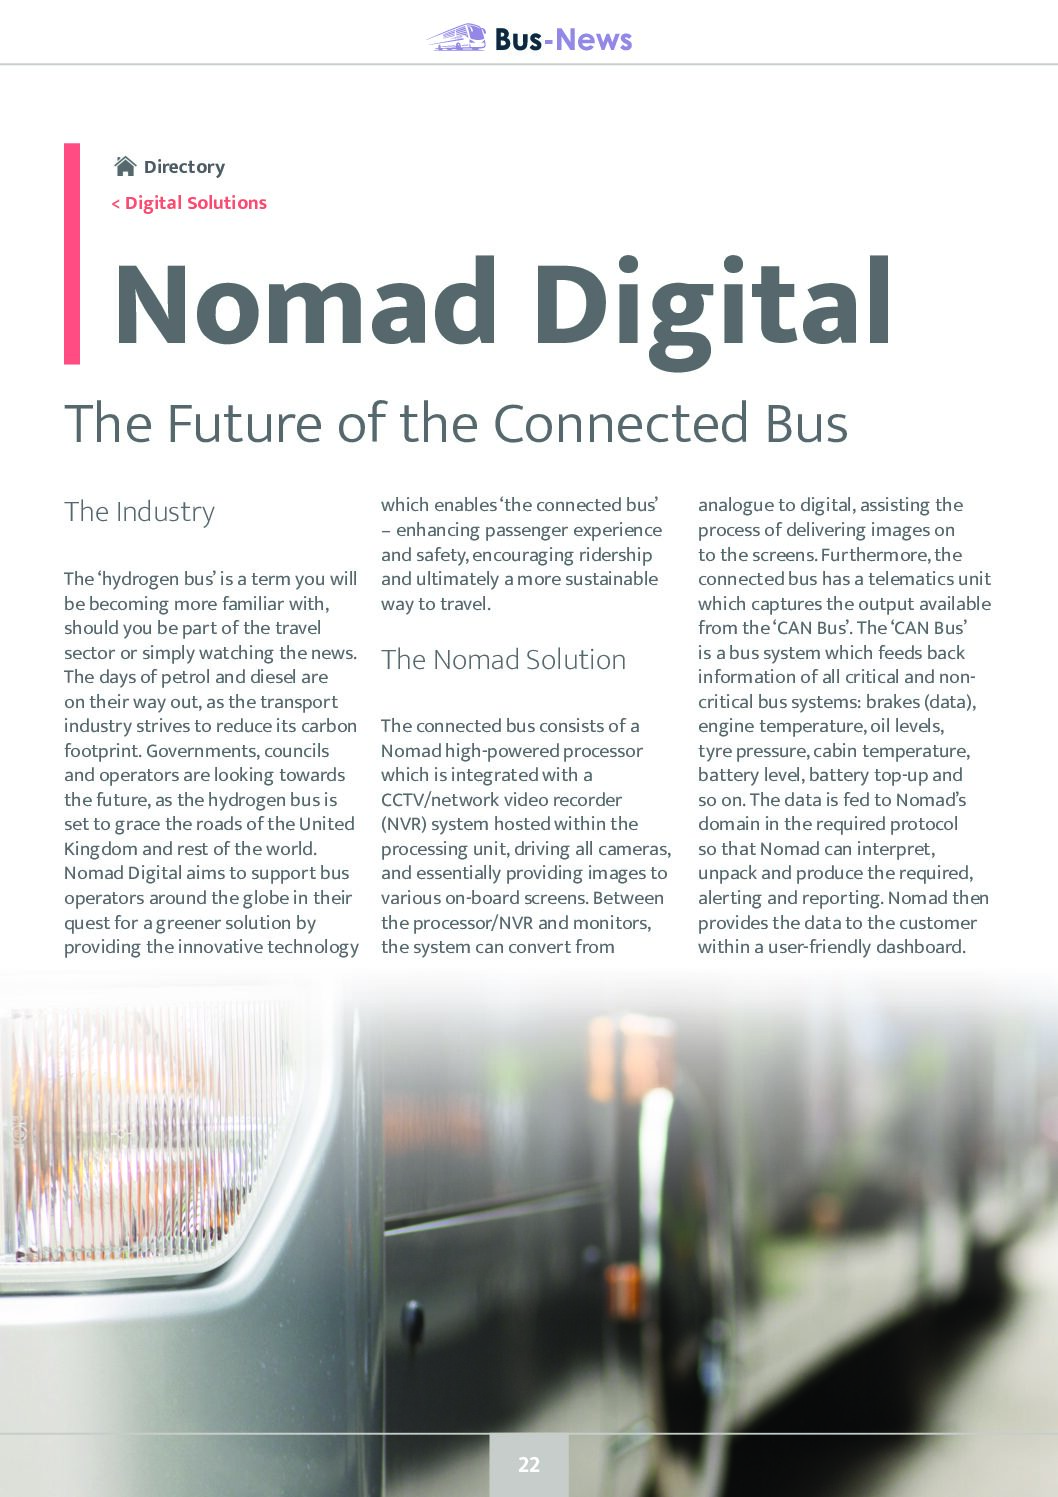 The Future of the Connected Bus